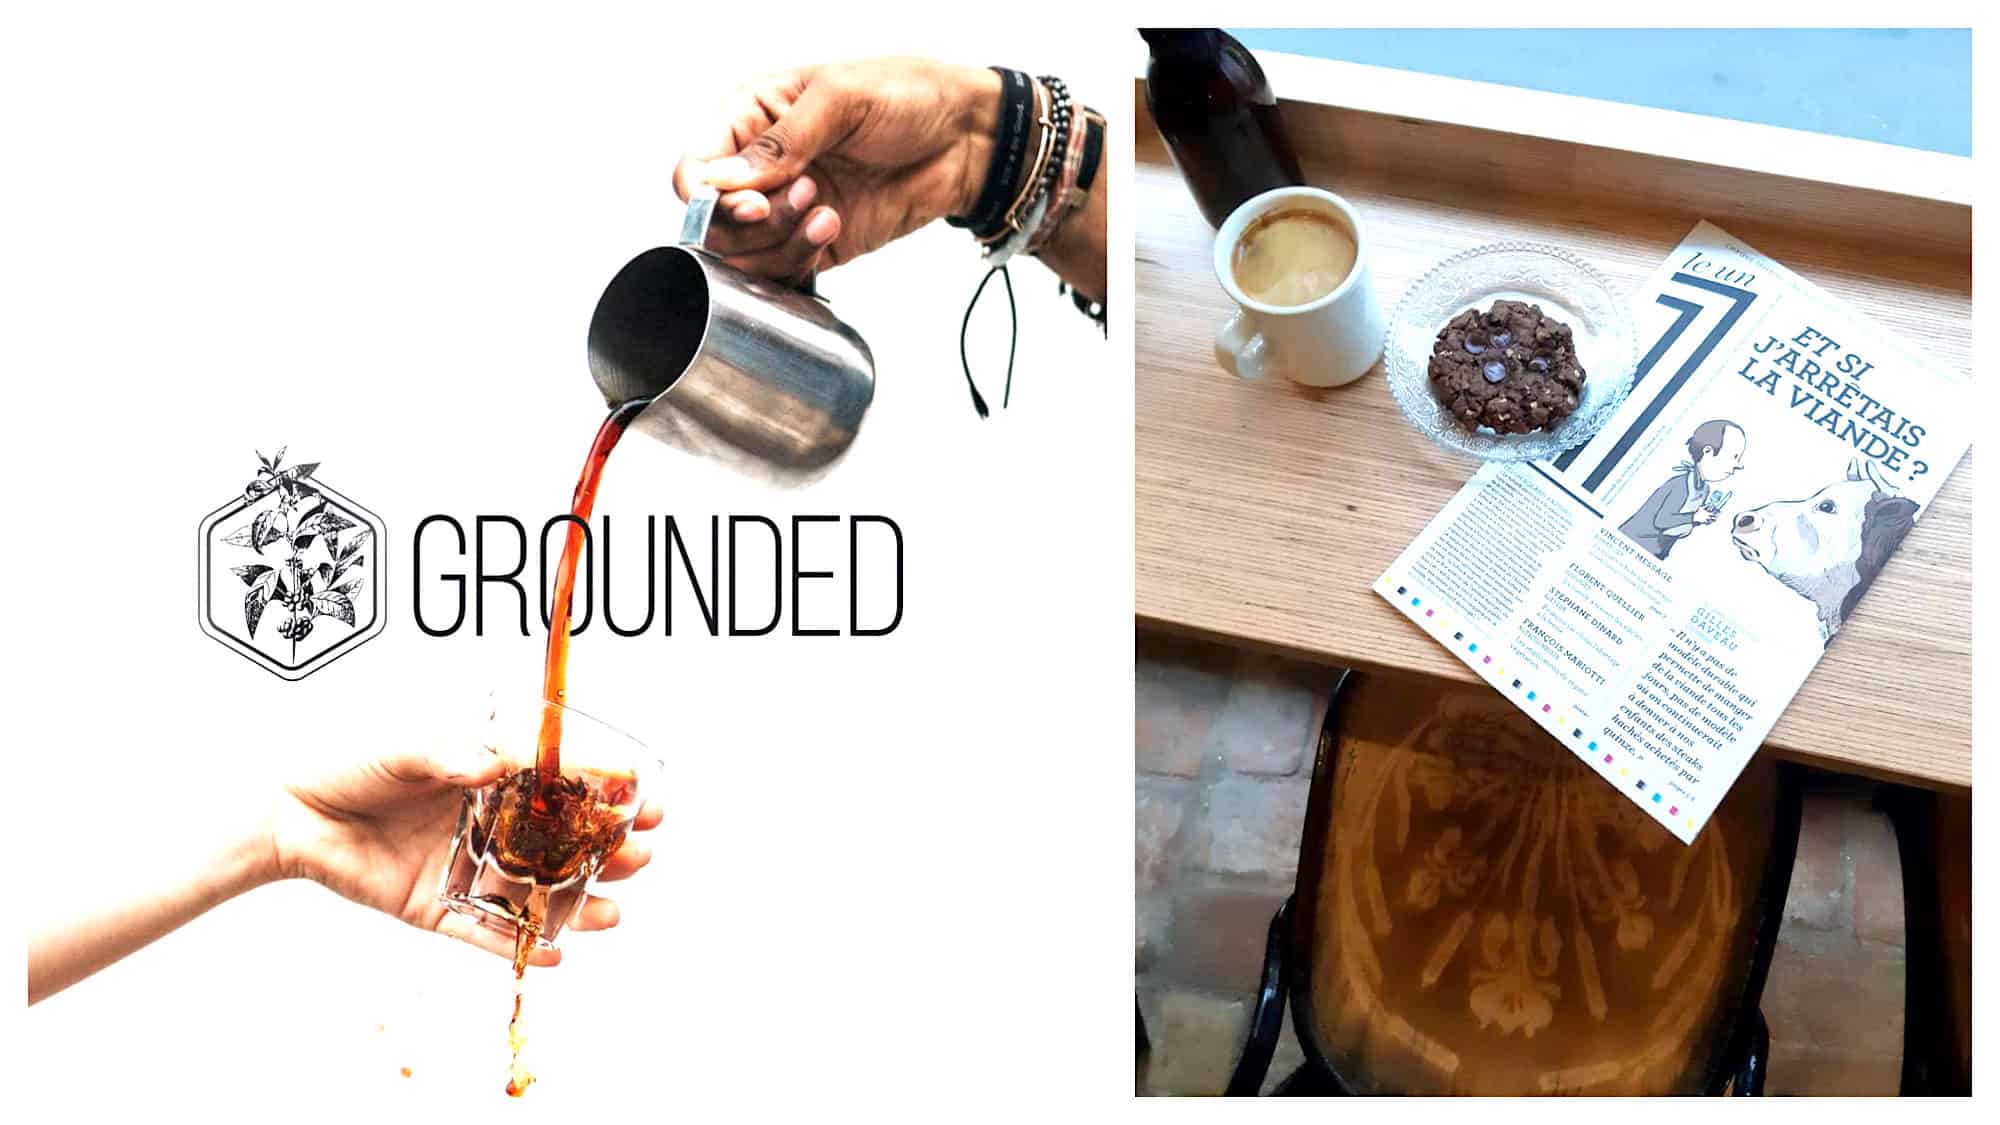 A poster for 'Grounded' coffee shop in Paris with someone serving coffee and spilling it (left). A wooden bench-table with a cup of coffee, a cookie and an issue of 'Un', a French magazine at vegan coffee shop Grounded (right).